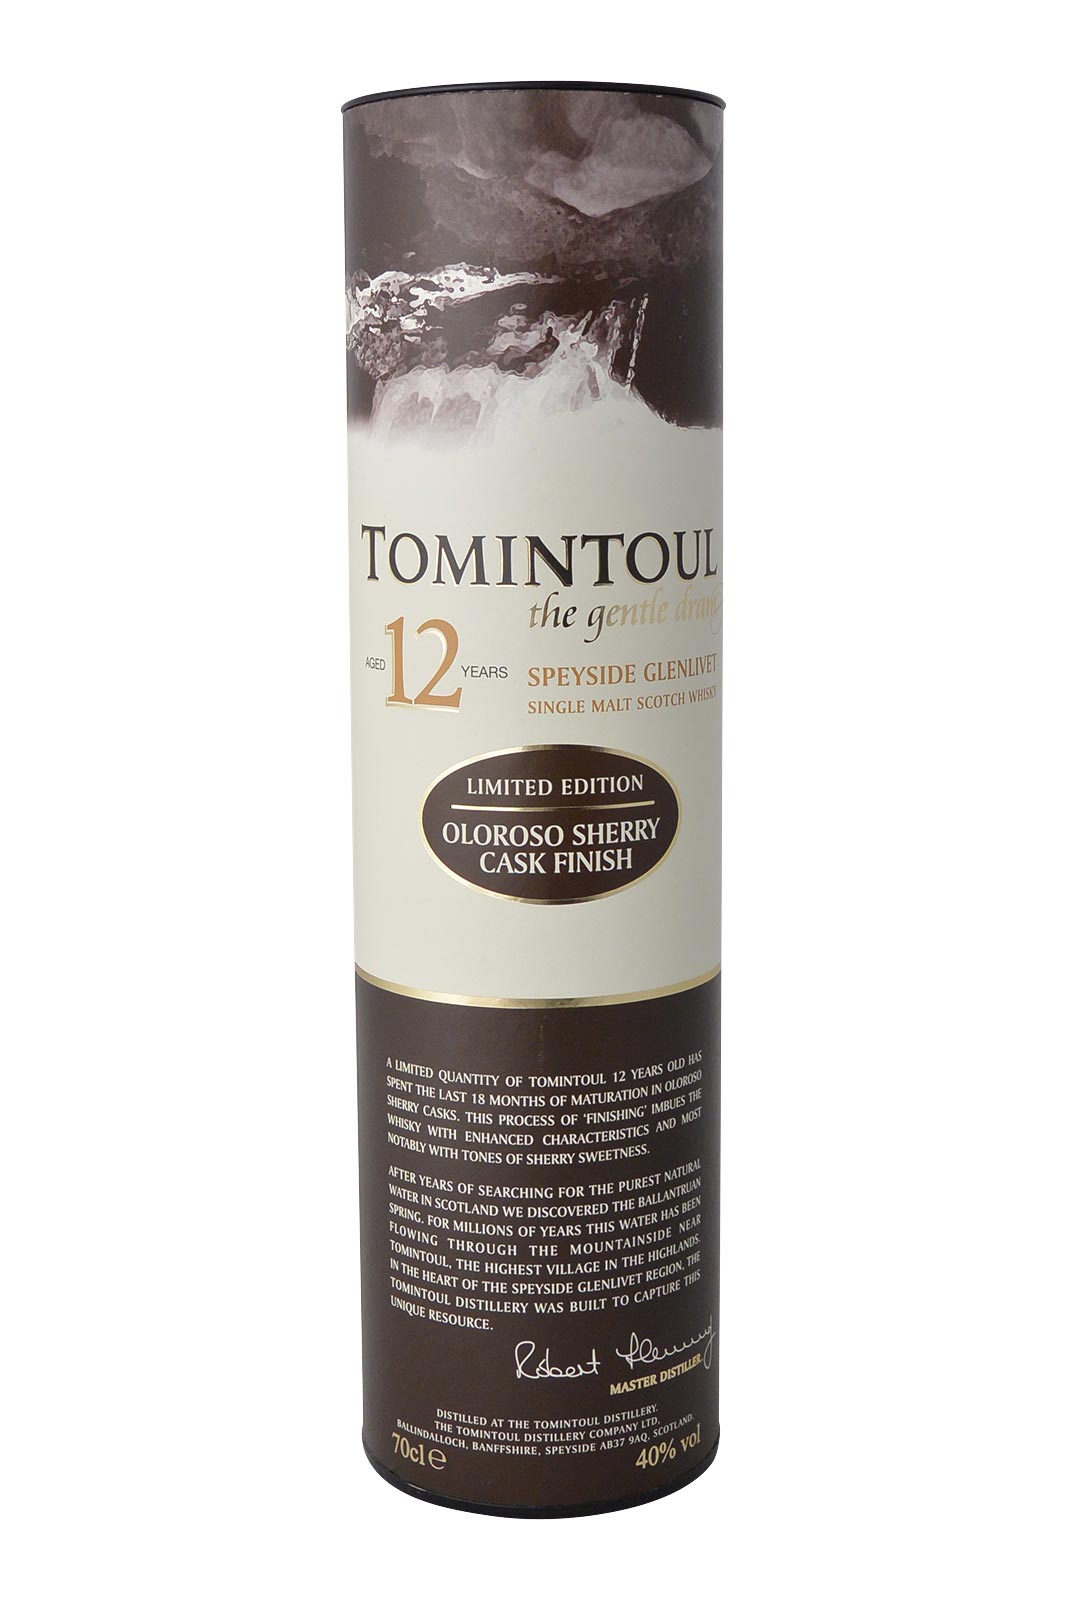 Tomintoul 12 Year Old Oloroso Sherry Cask